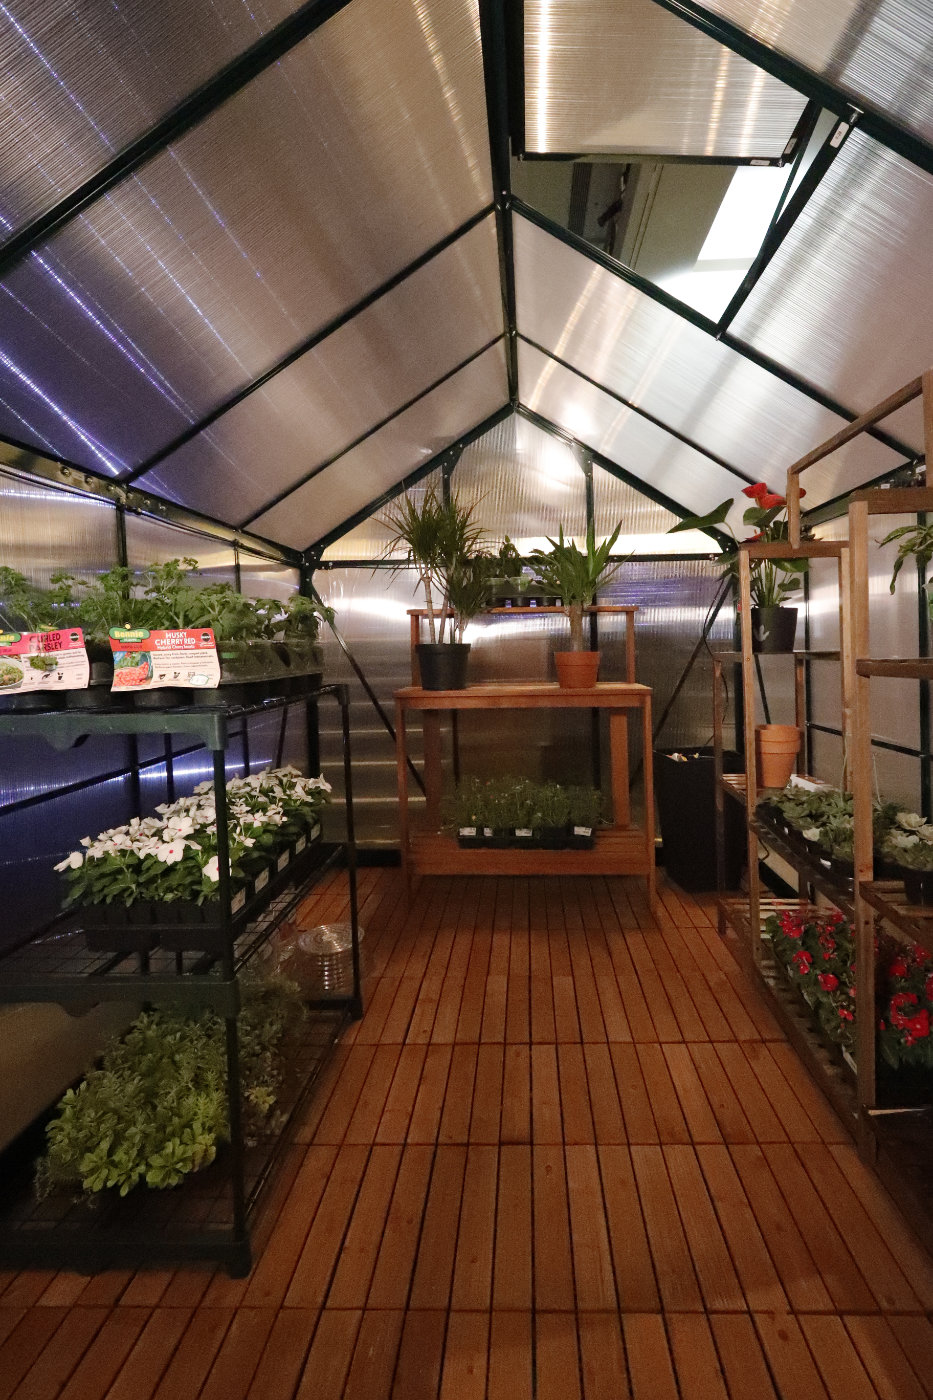 A greenhouse attached to the house with variouse plants inside